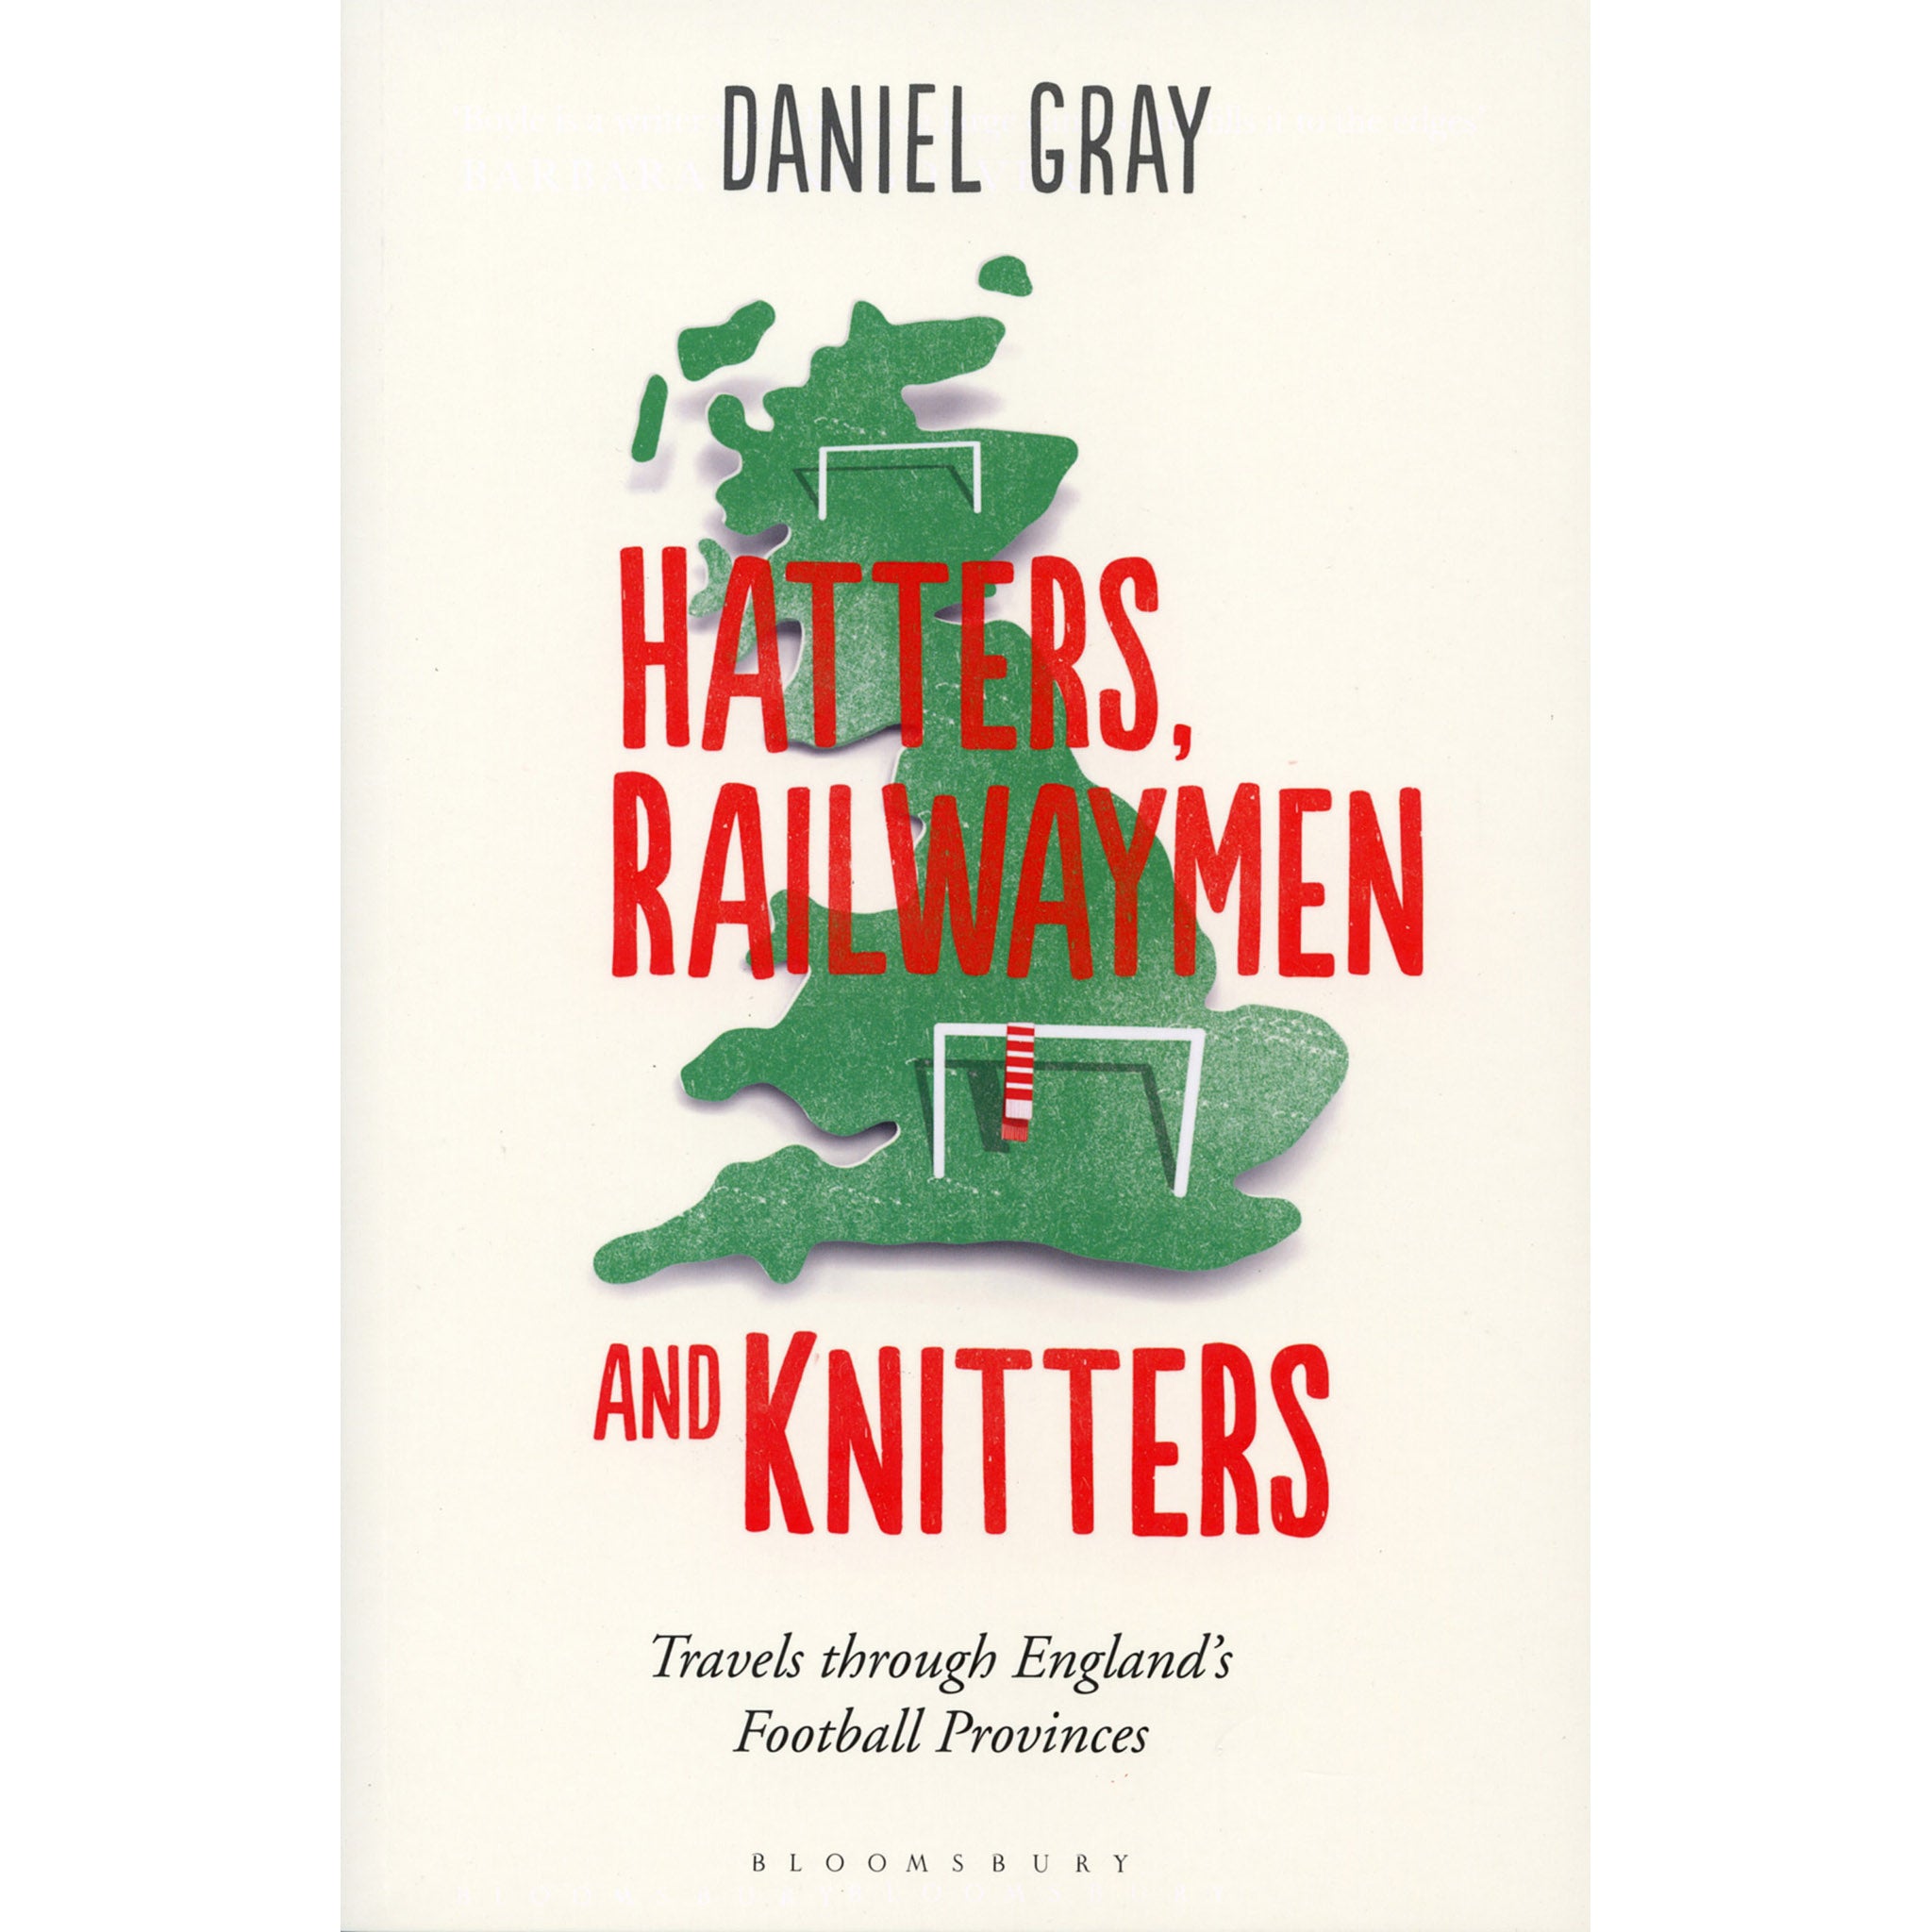 Hatters, Railwaymen and Knitters – Travels through England's Football Provinces